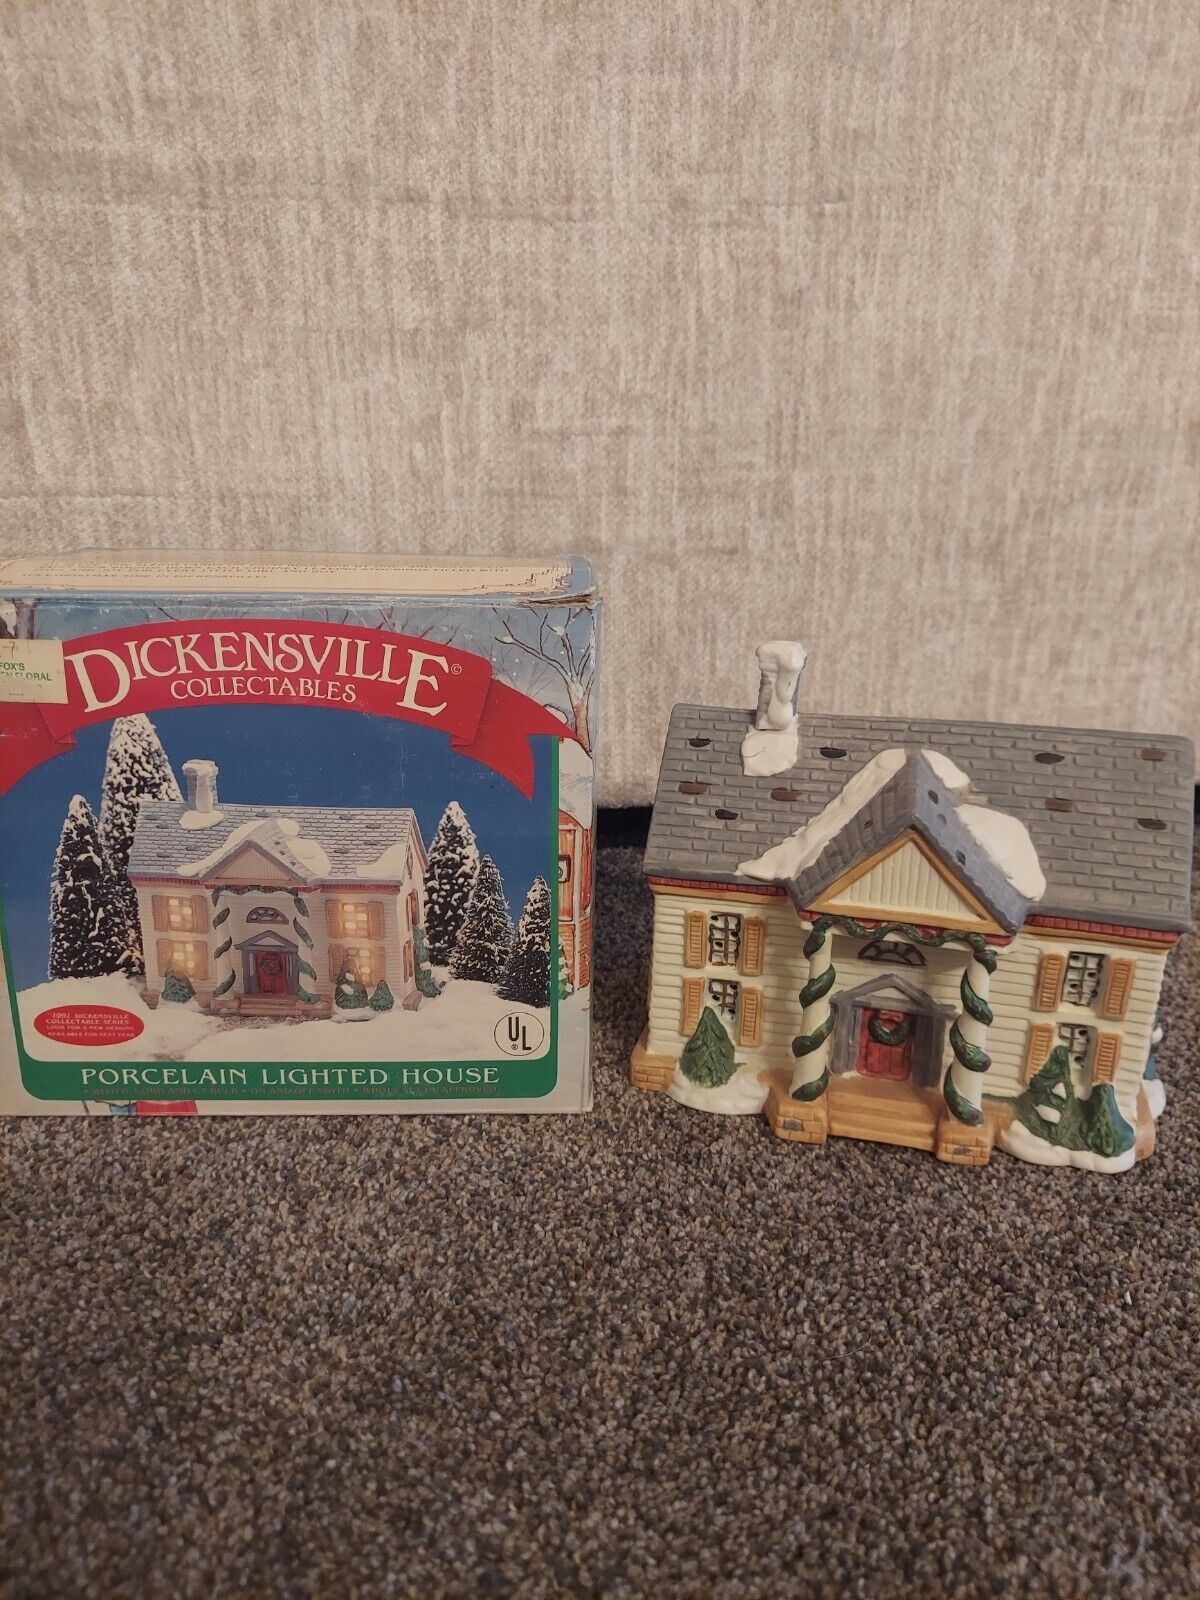 DICKENSVILLE COLLECTABLES 1990 Porcelain Lighted House TWO STORY NOMA 